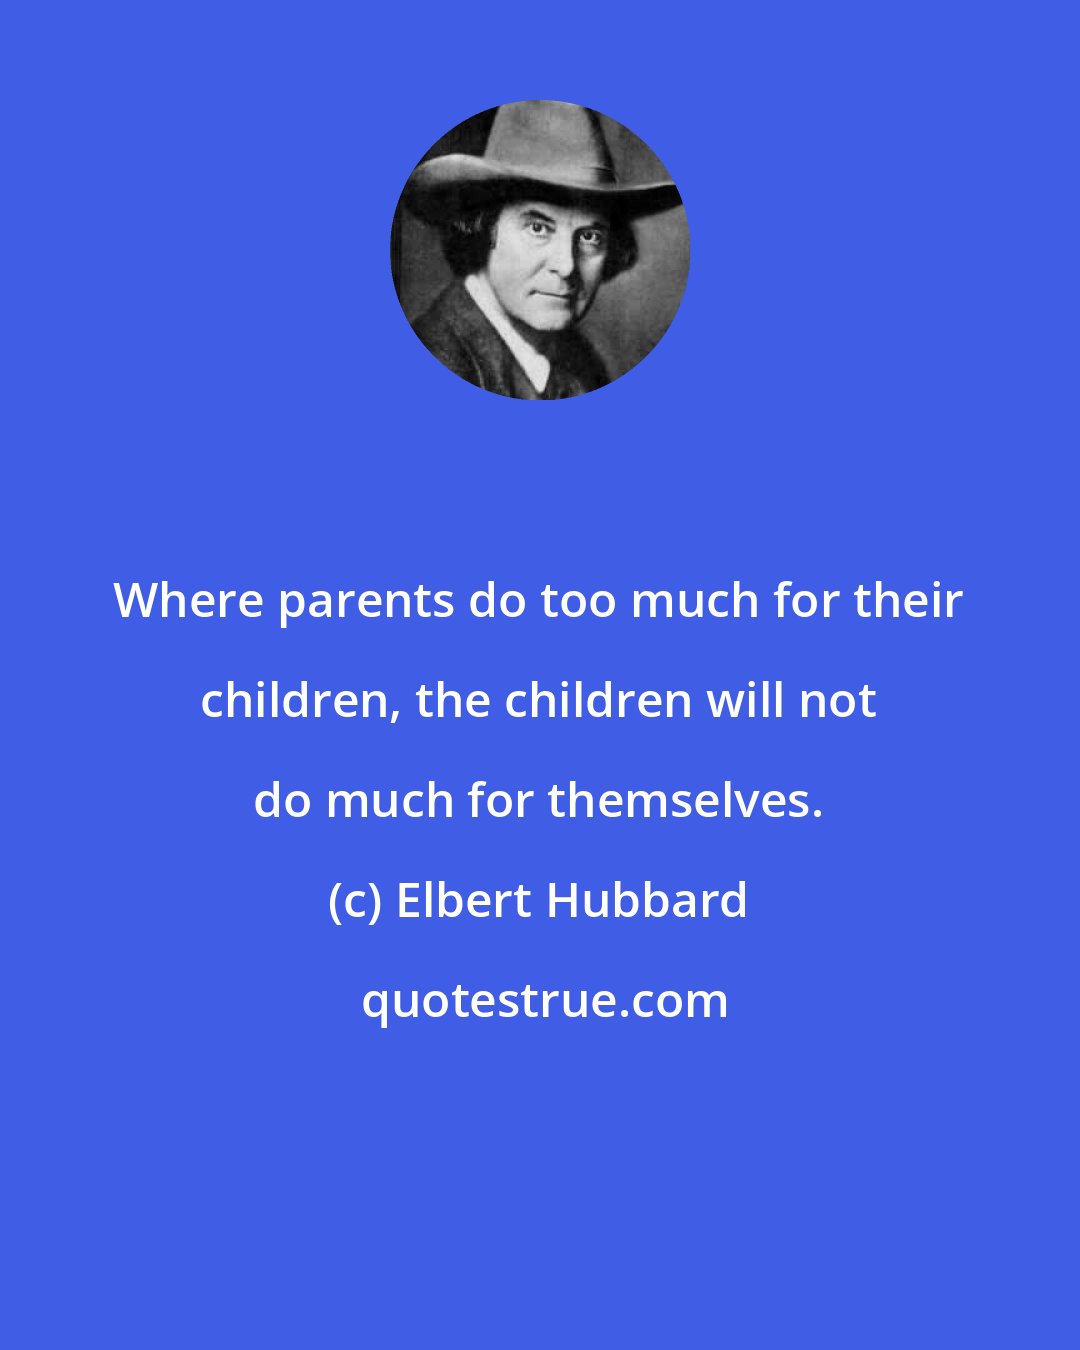 Elbert Hubbard: Where parents do too much for their children, the children will not do much for themselves.